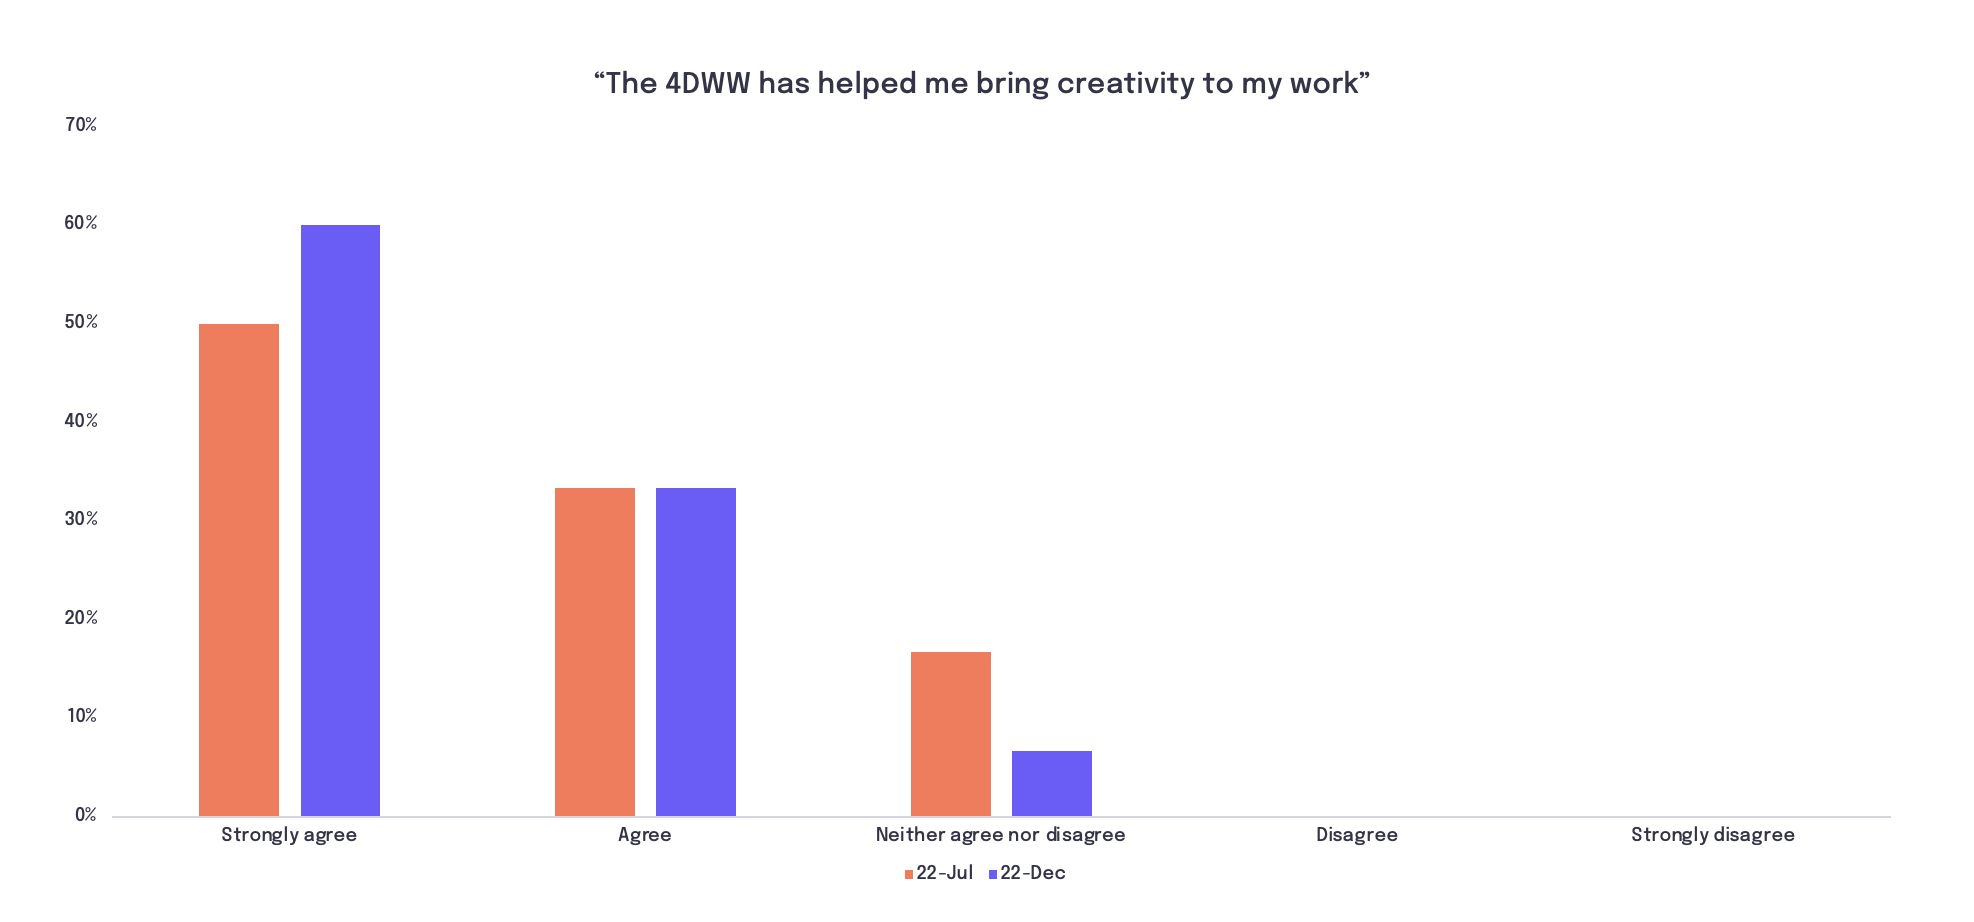 A poll showing that most Arts Midwest staff agree that the four-day work week brought more creativity into their work